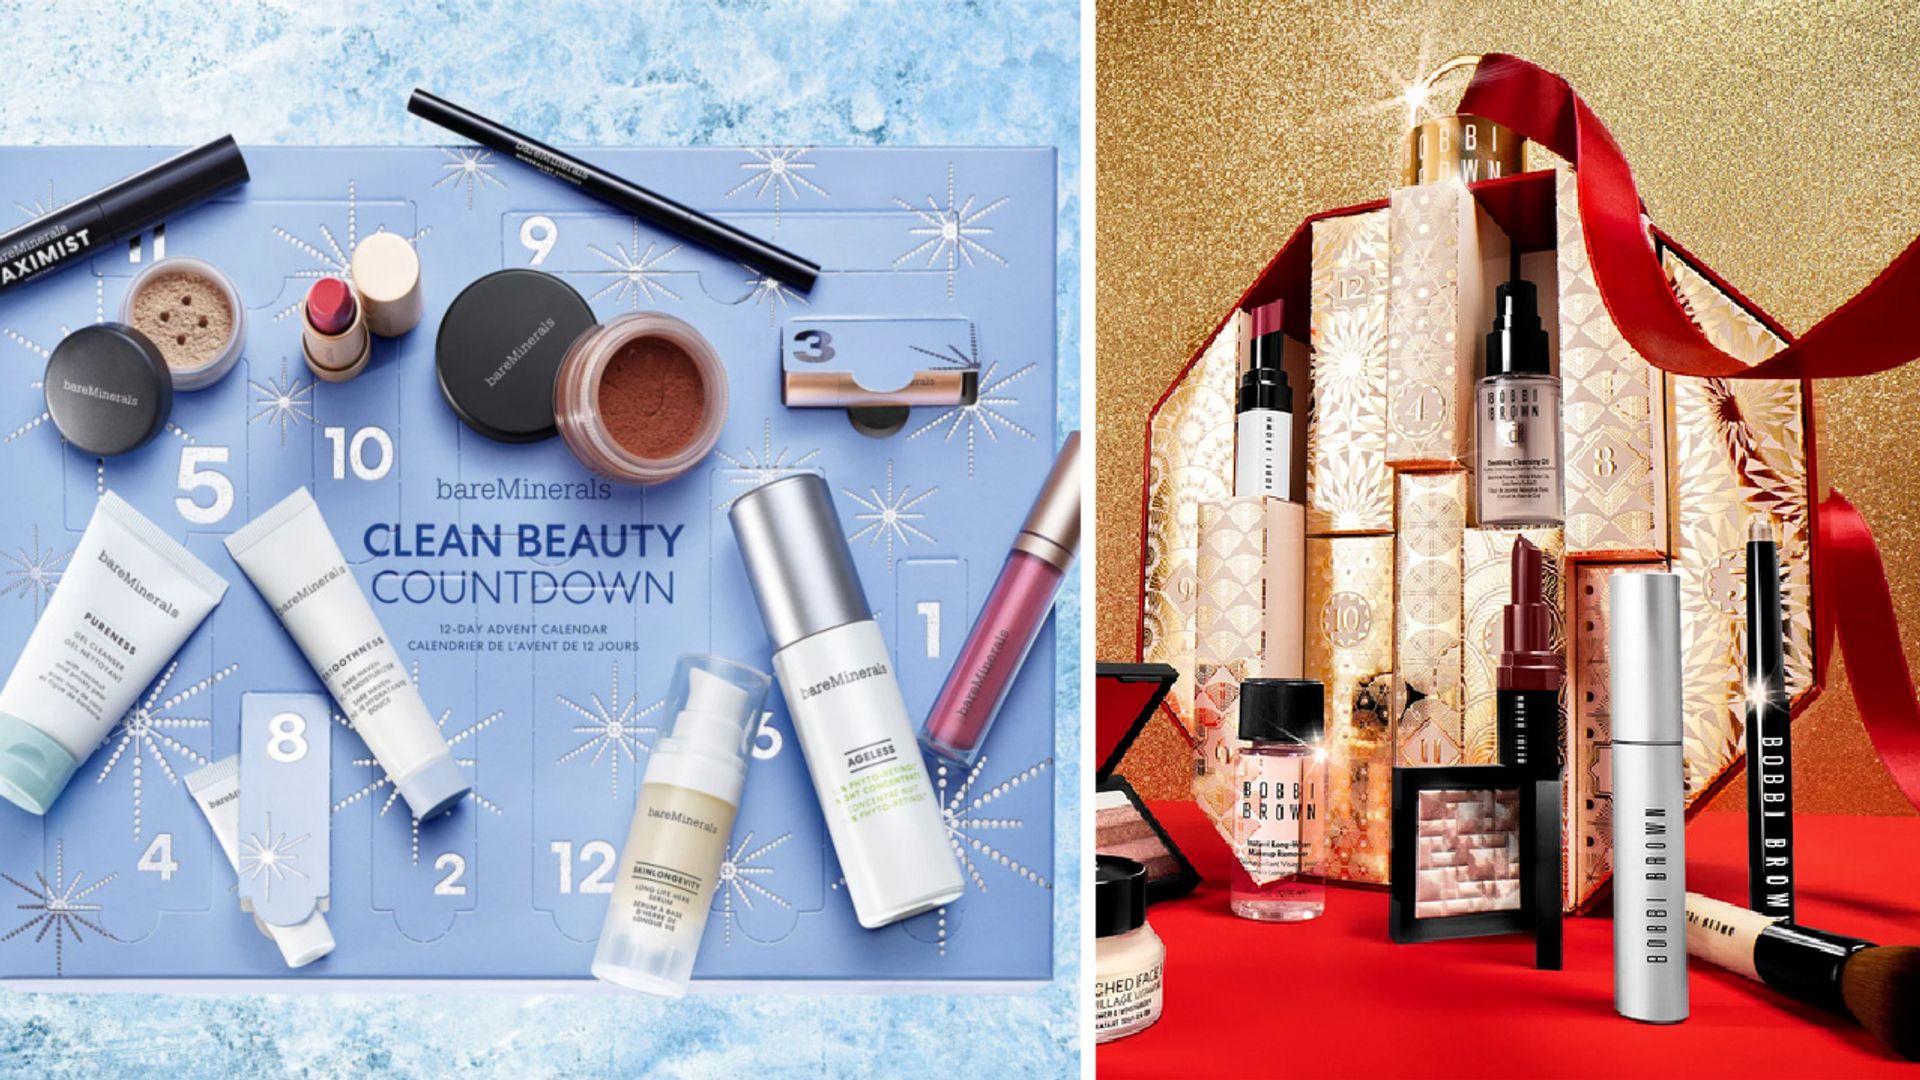 Boots beauty advent calendar review 2023: What's inside?